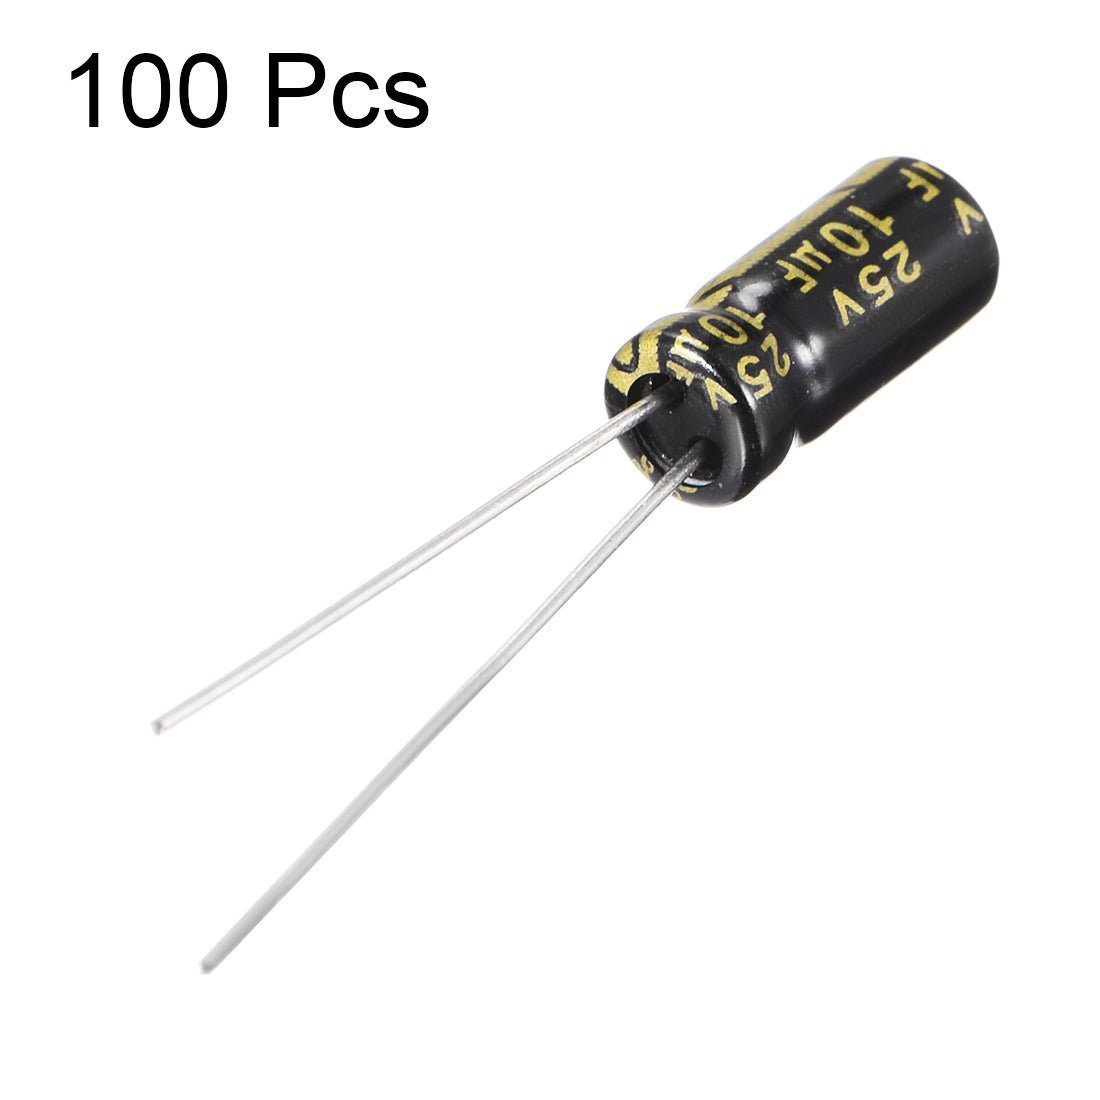 uxcell Uxcell Aluminum Radial Electrolytic Capacitor with 10uF 25V 105 Celsius Life 2000H 5 x 11 mm Black 100 pcs